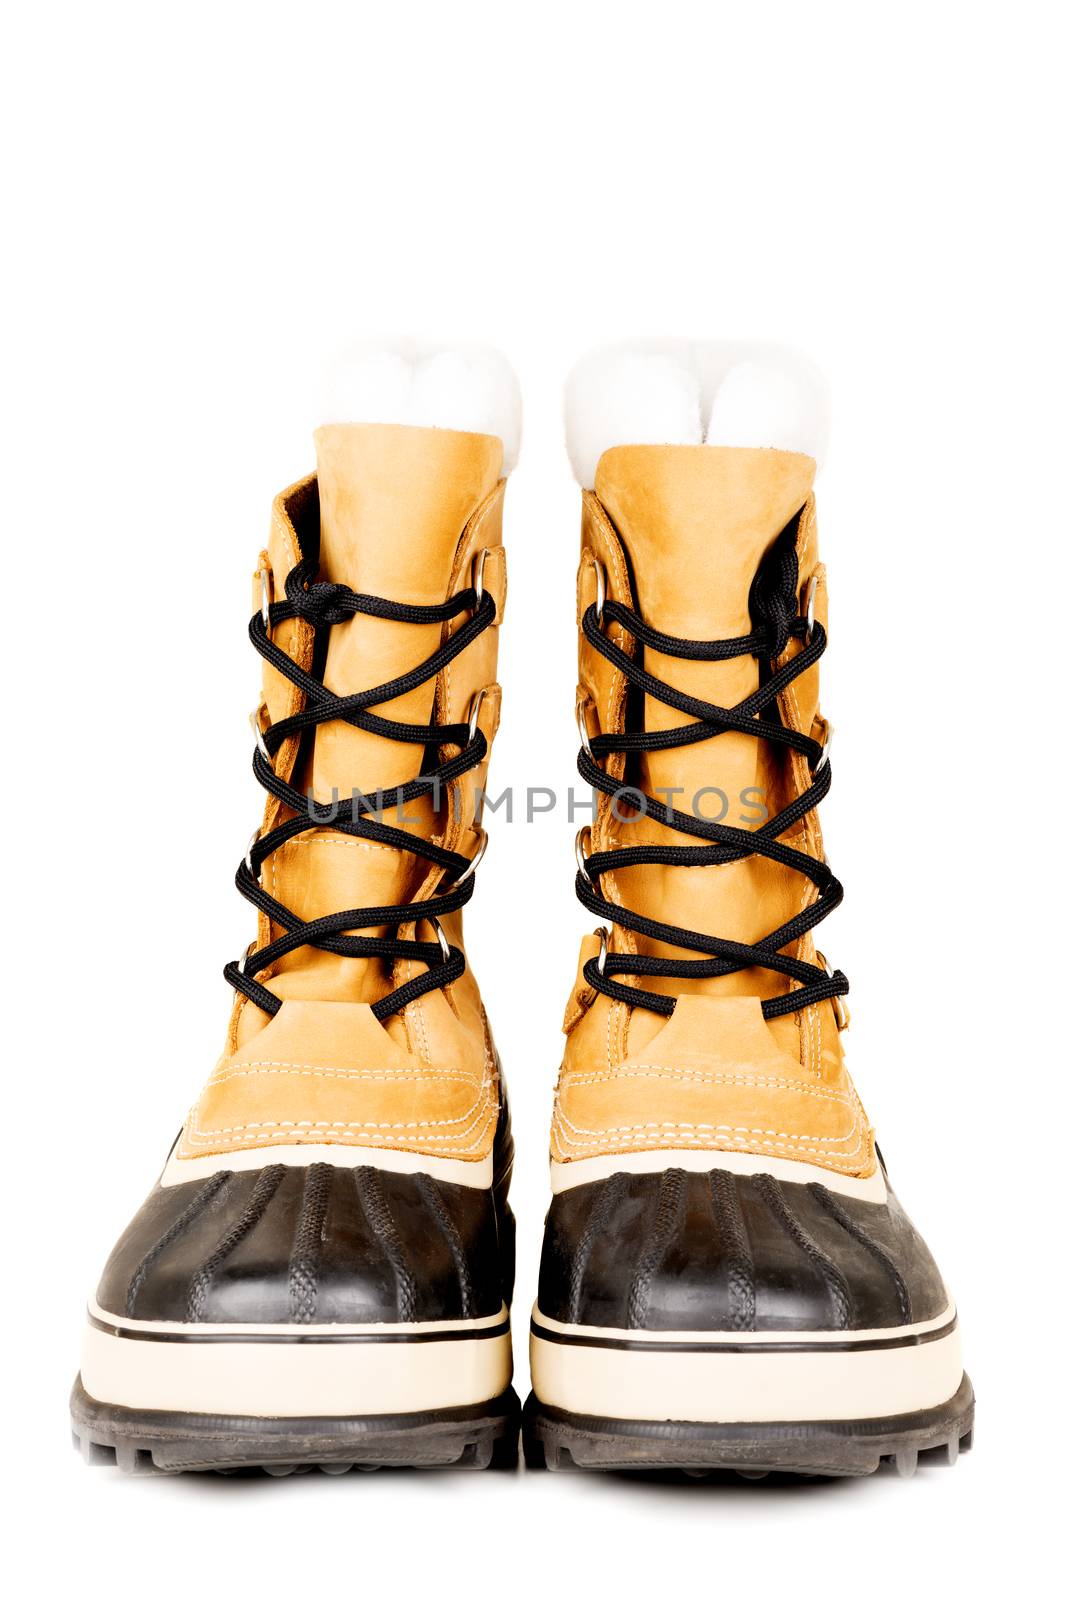 Unisex winter high boots isolated on white